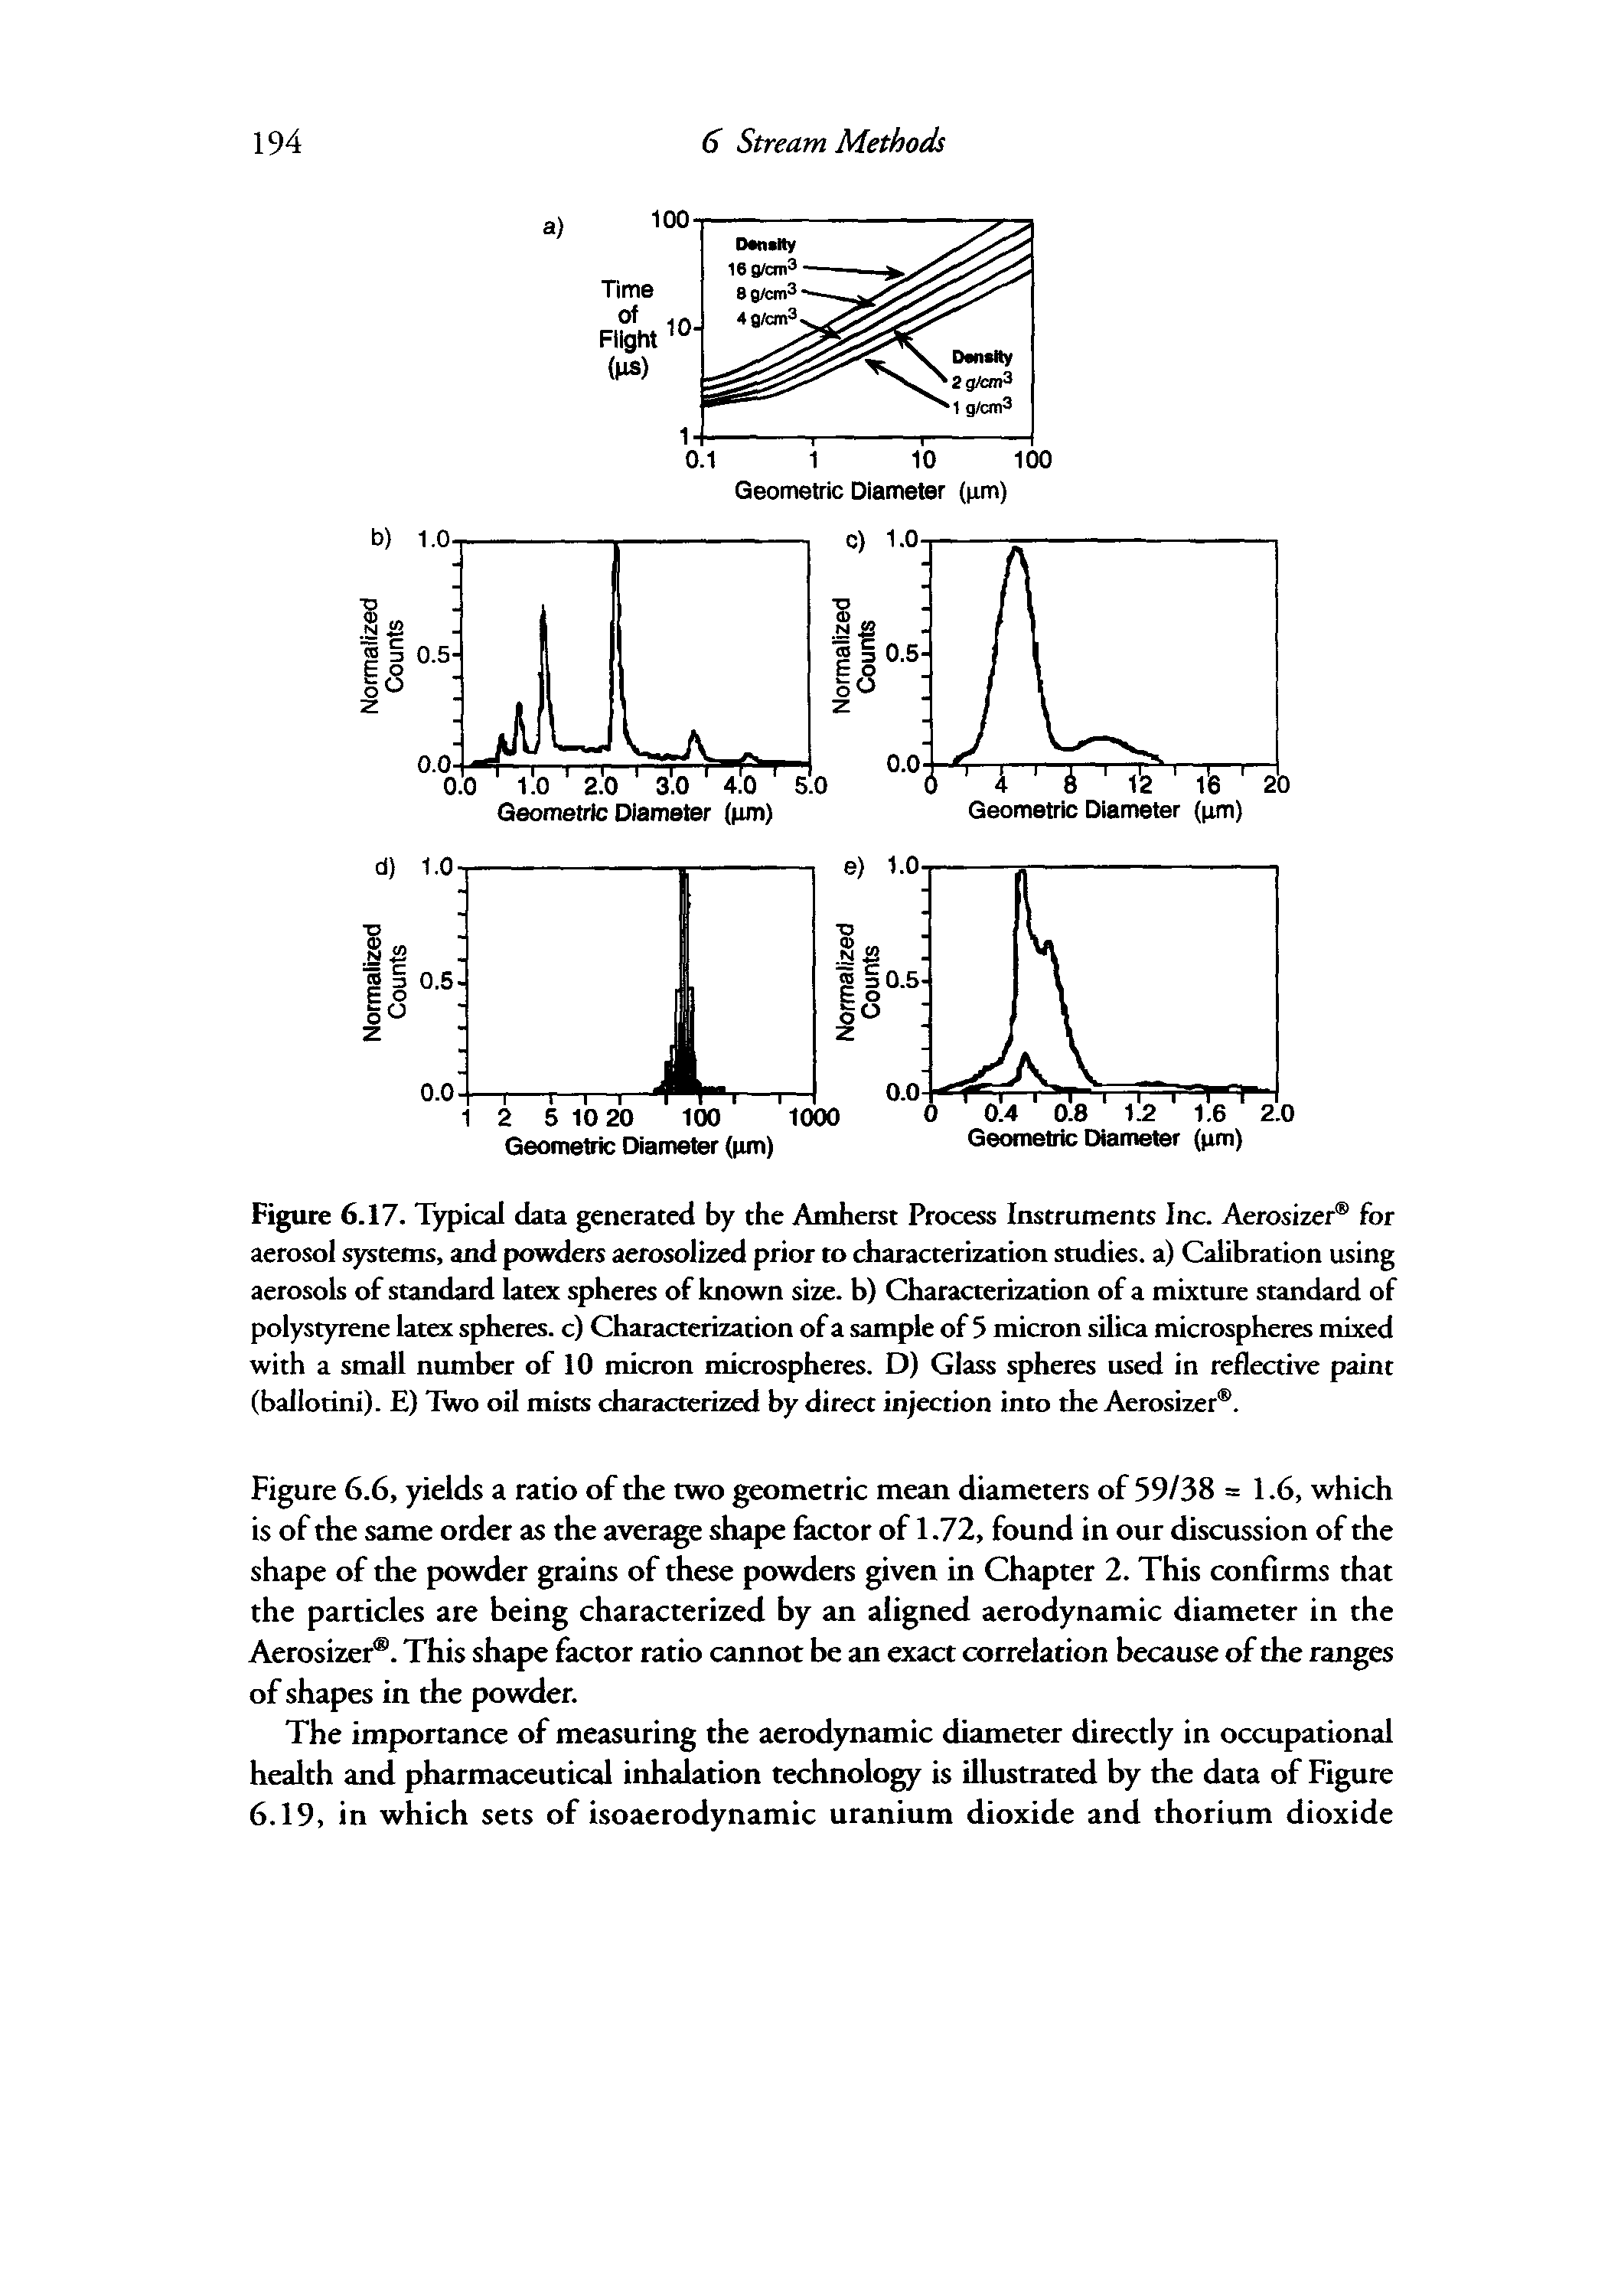 Figure 6.17. Typical data generated by the Amherst Process Instruments Inc. Aerosizer for aerosol systems, and powders aerosolized prior to characterization smdies. a) Calibration using aerosols of standard latex spheres of known size, b) Characterization of a mixture standard of polystyrene latex spheres, c) Characterization of a sample of 5 micron silica microspheres mixed with a small number of 10 micron microspheres. D) Glass spheres used in reflective paint (ballotini). E) Two oil mists diatacterized by direct injection into the Aerosizer .